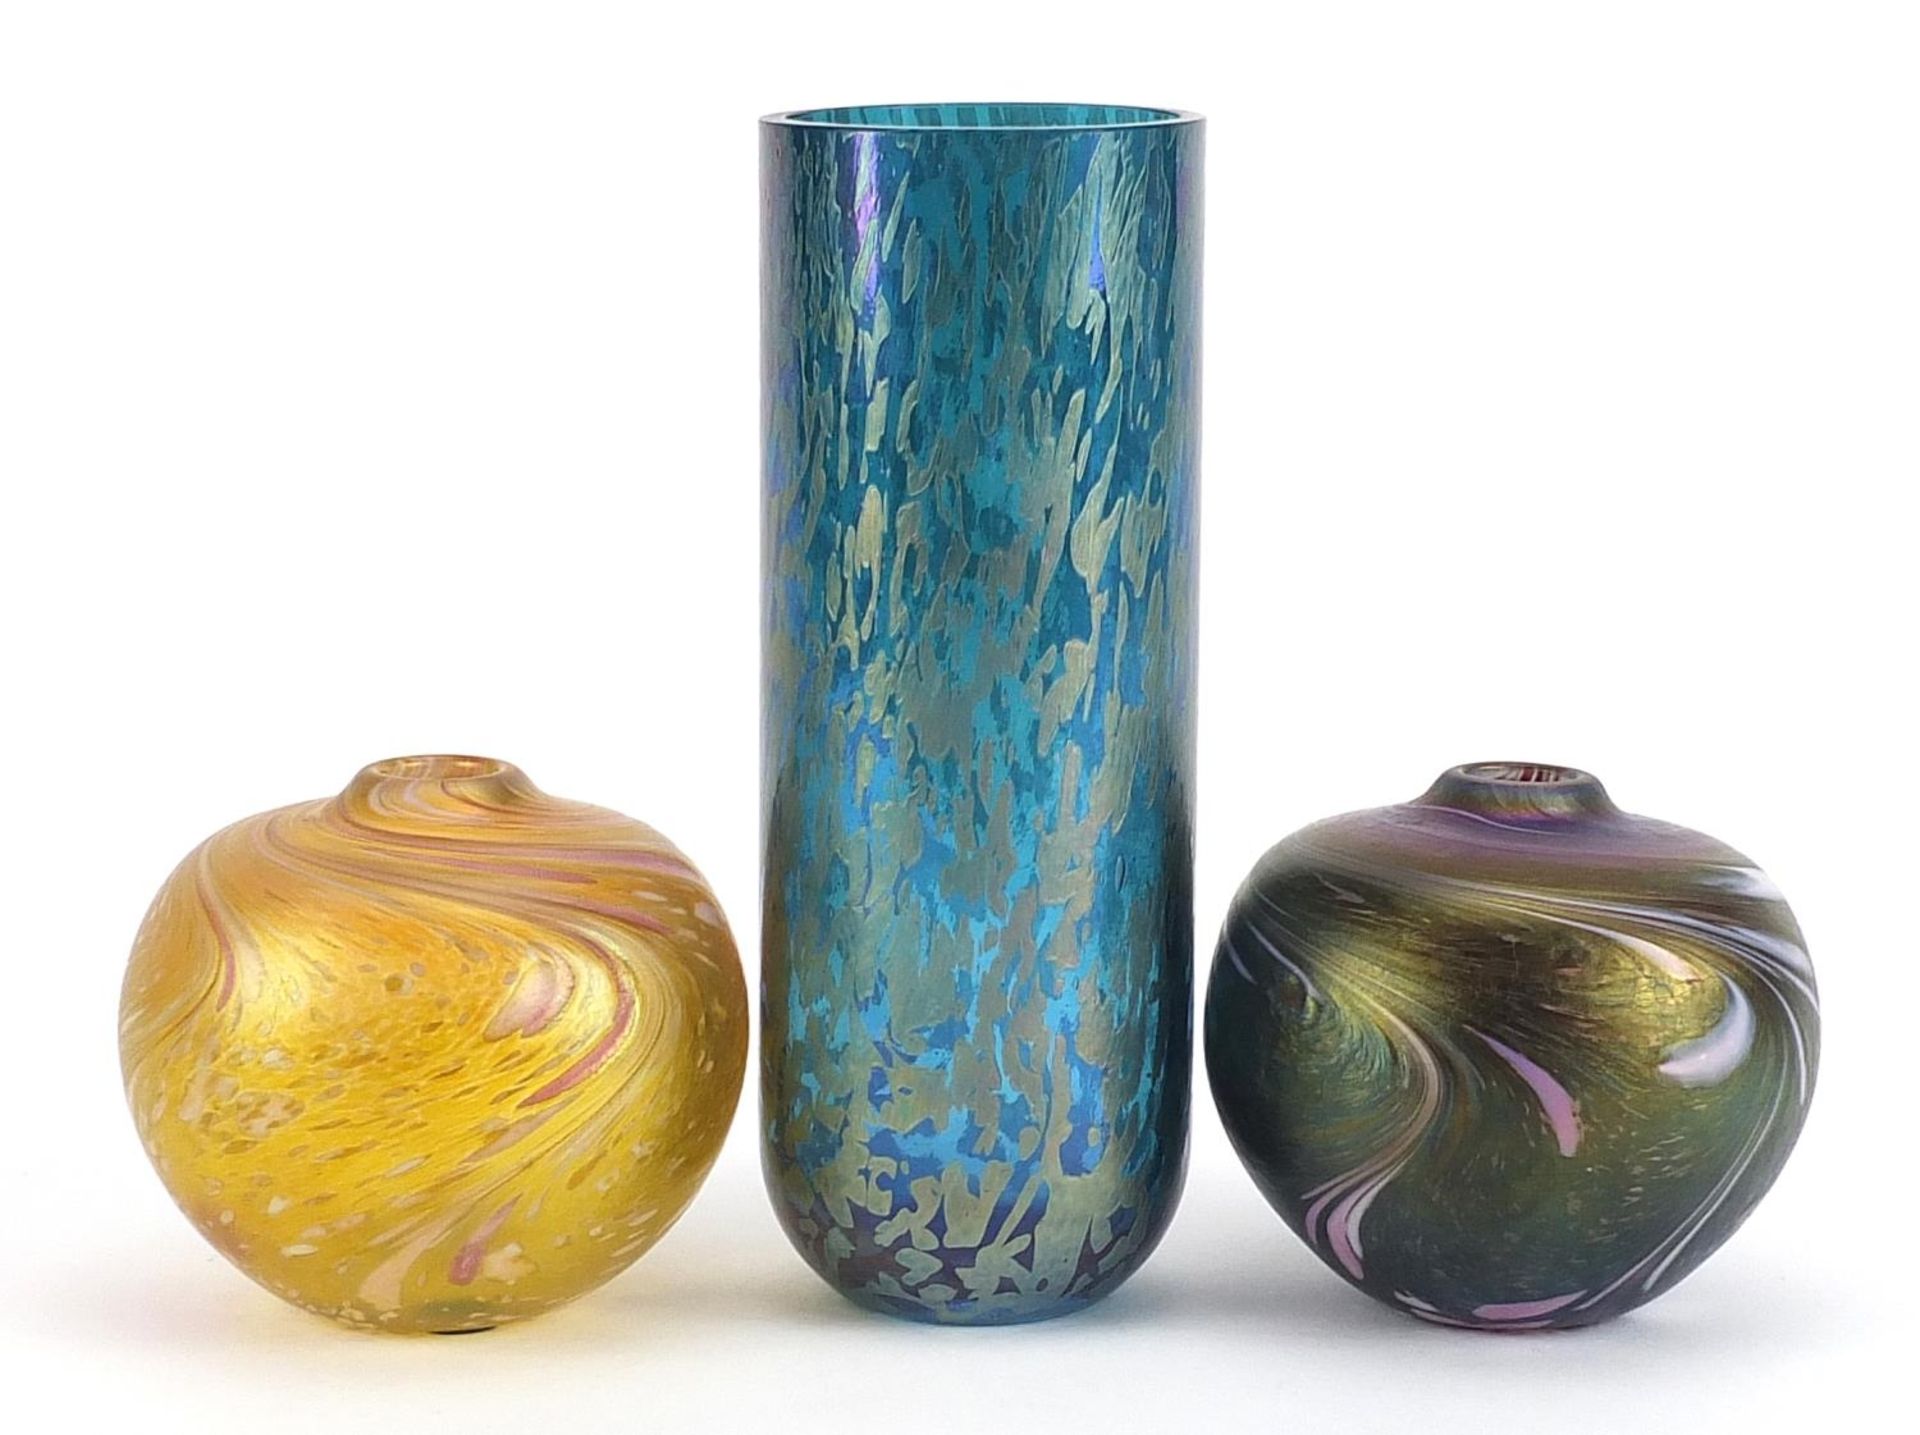 Iridescent glassware including a cylindrical vase by Royal Brierley, the largest 18cm high